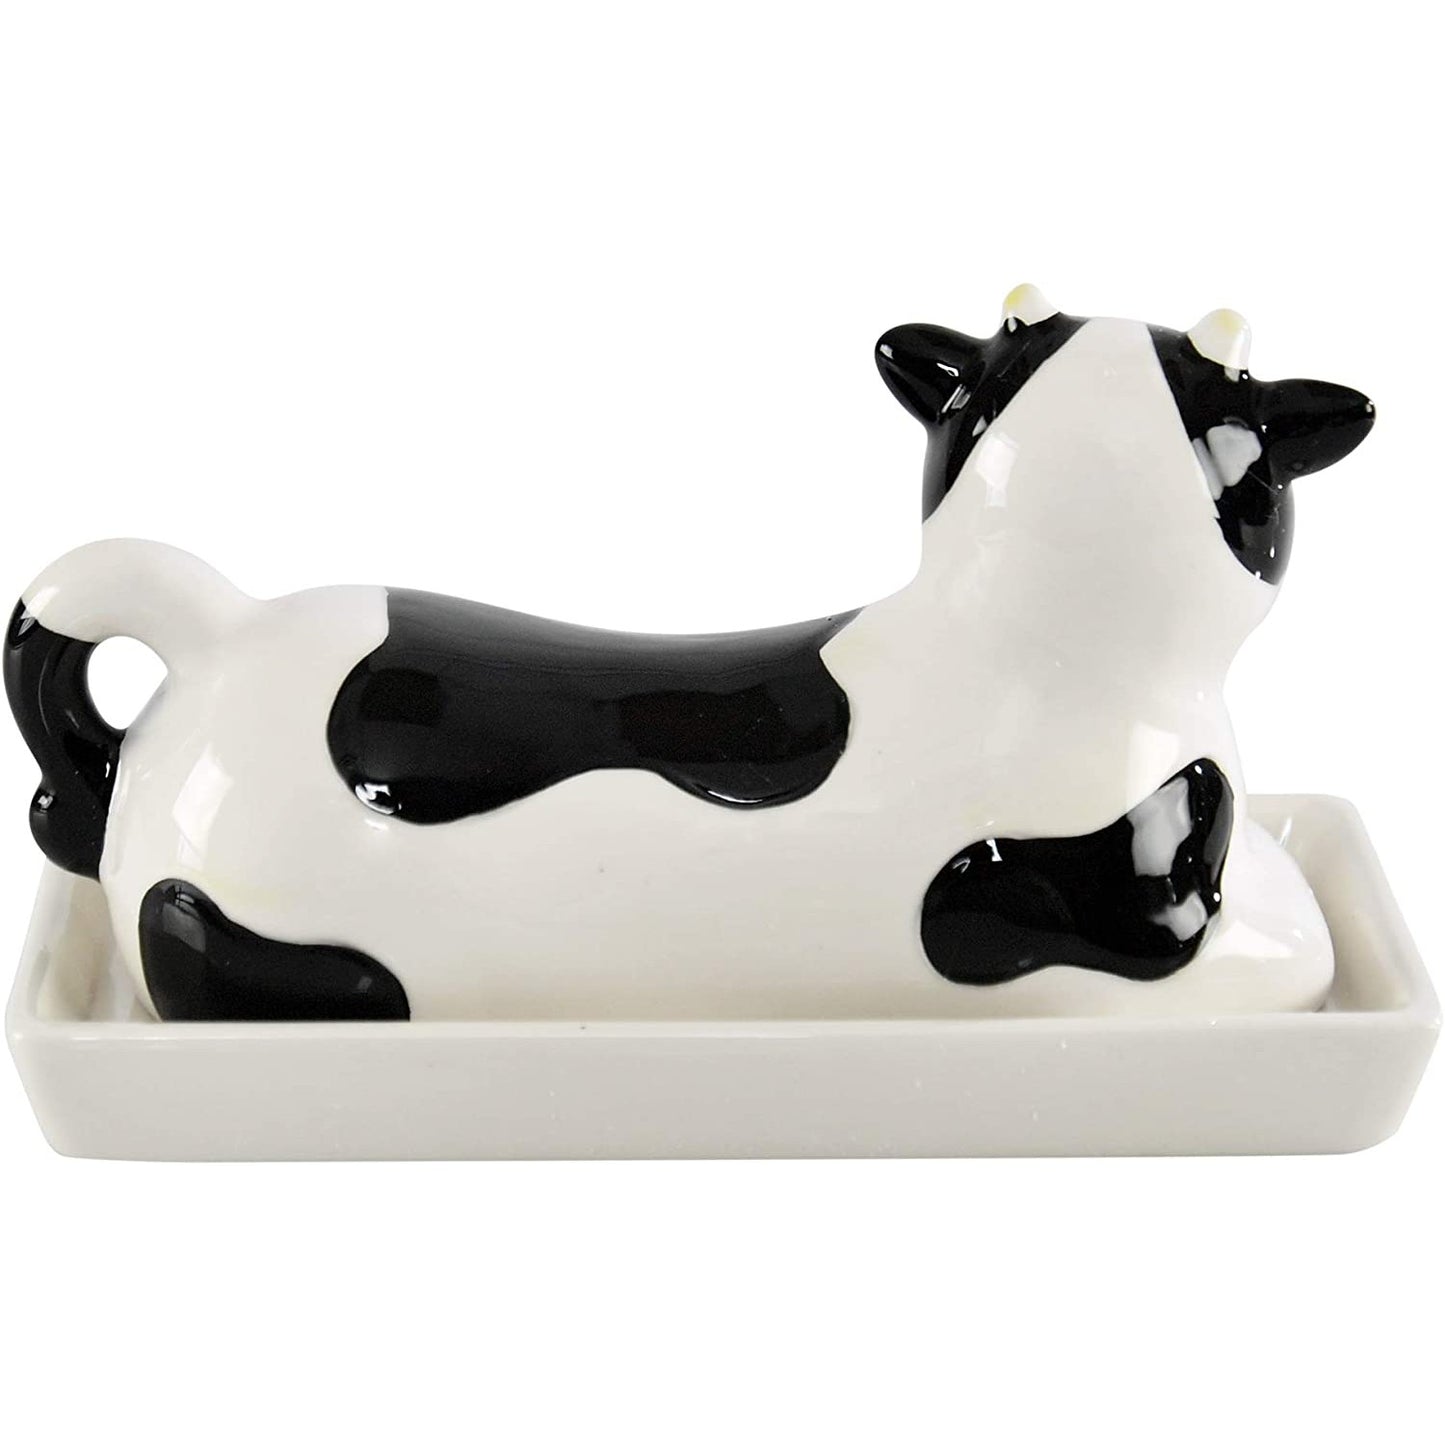 The back of a black and white cow shaped butter dish.